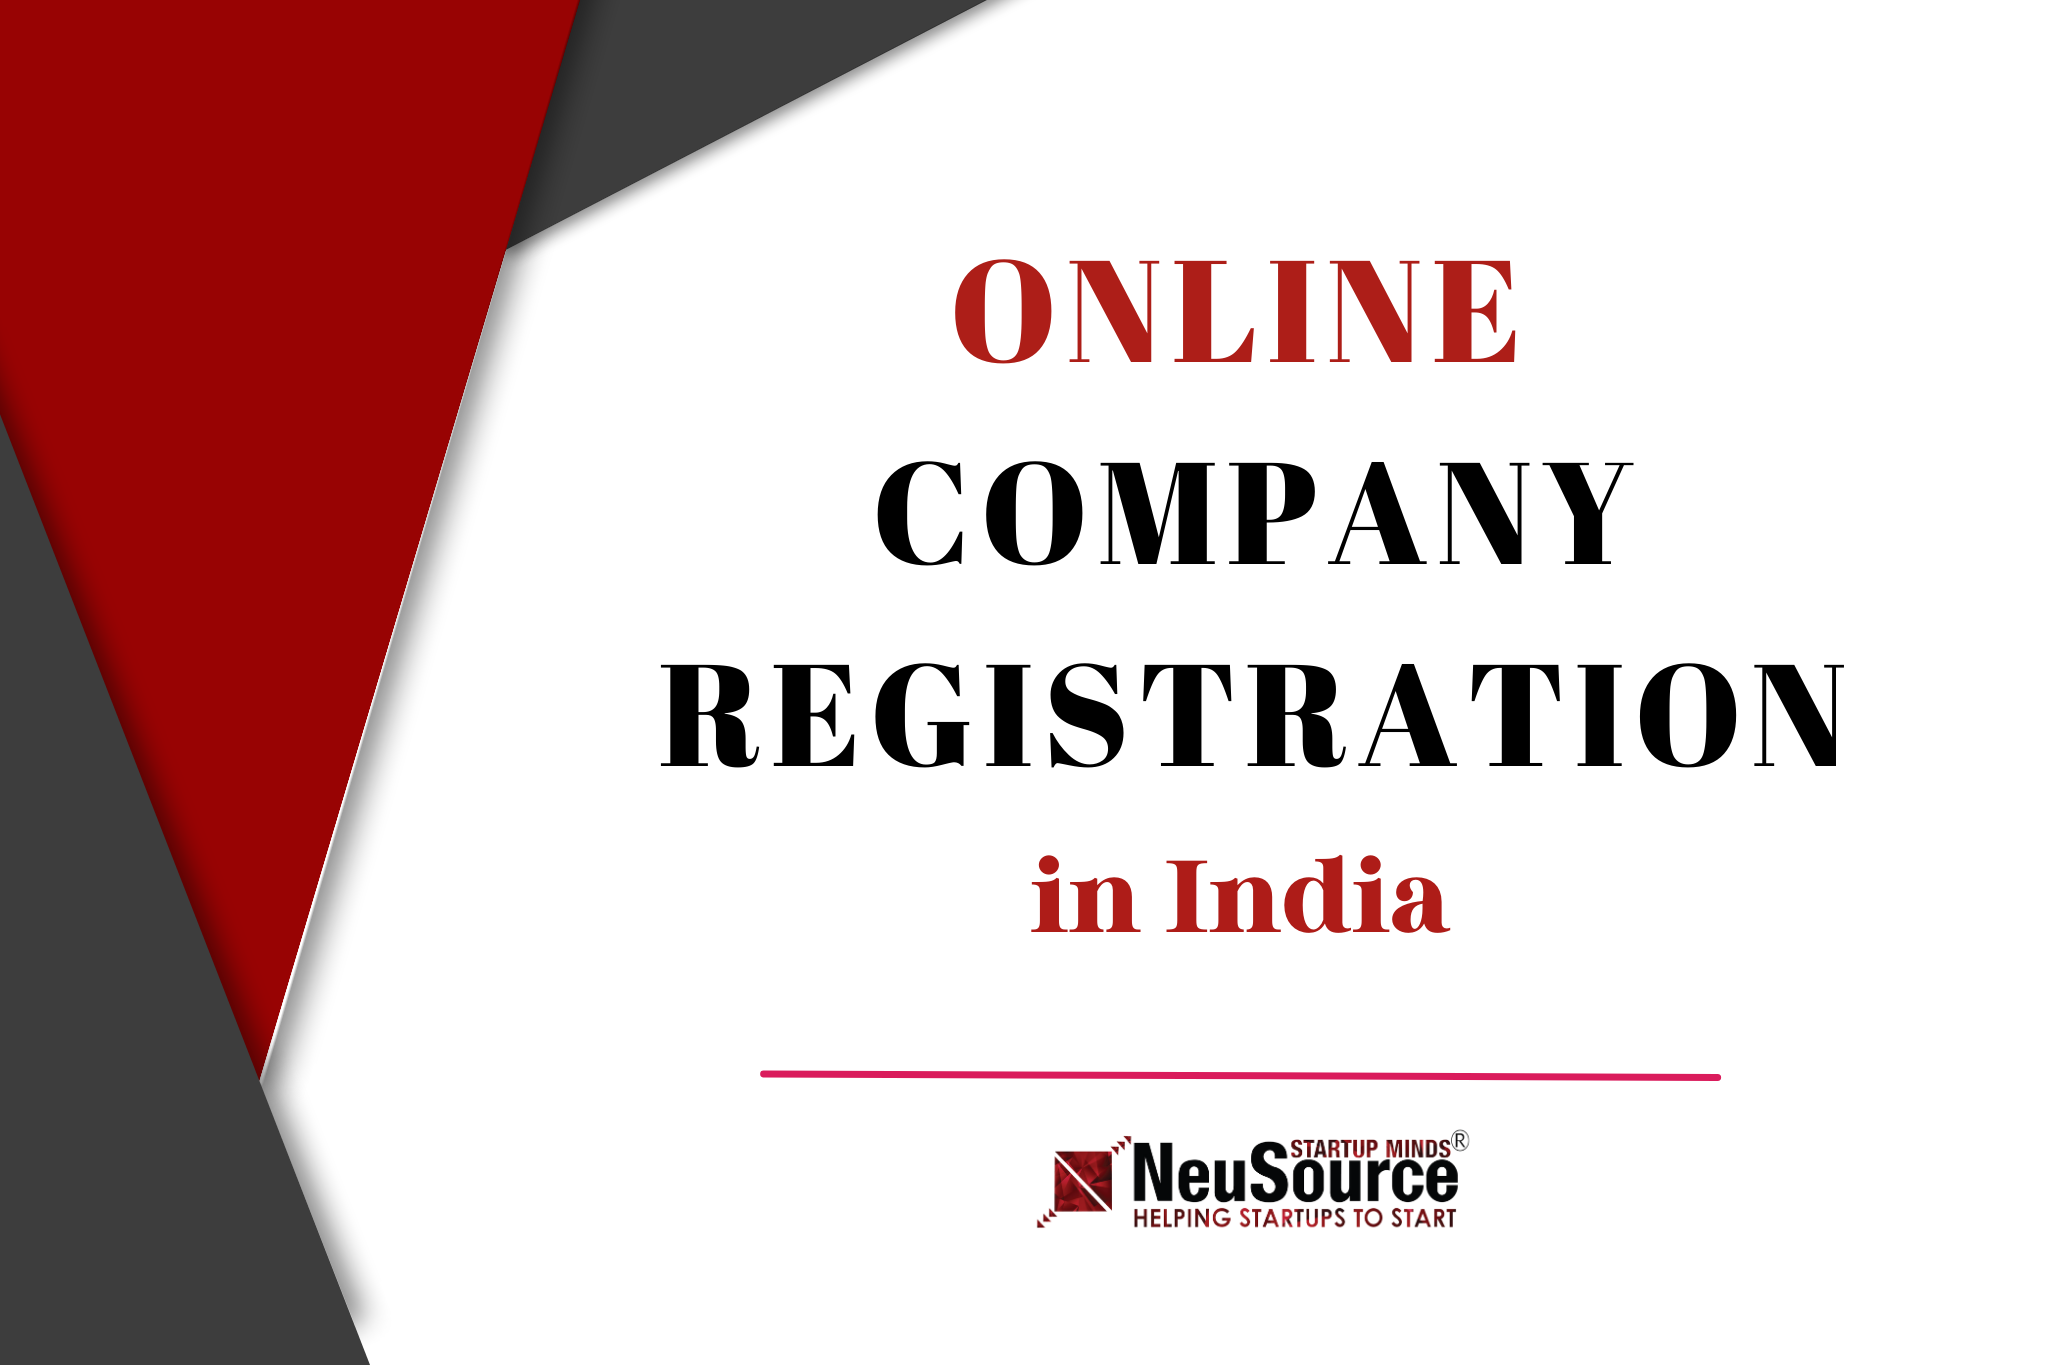 Online Company Registration in India